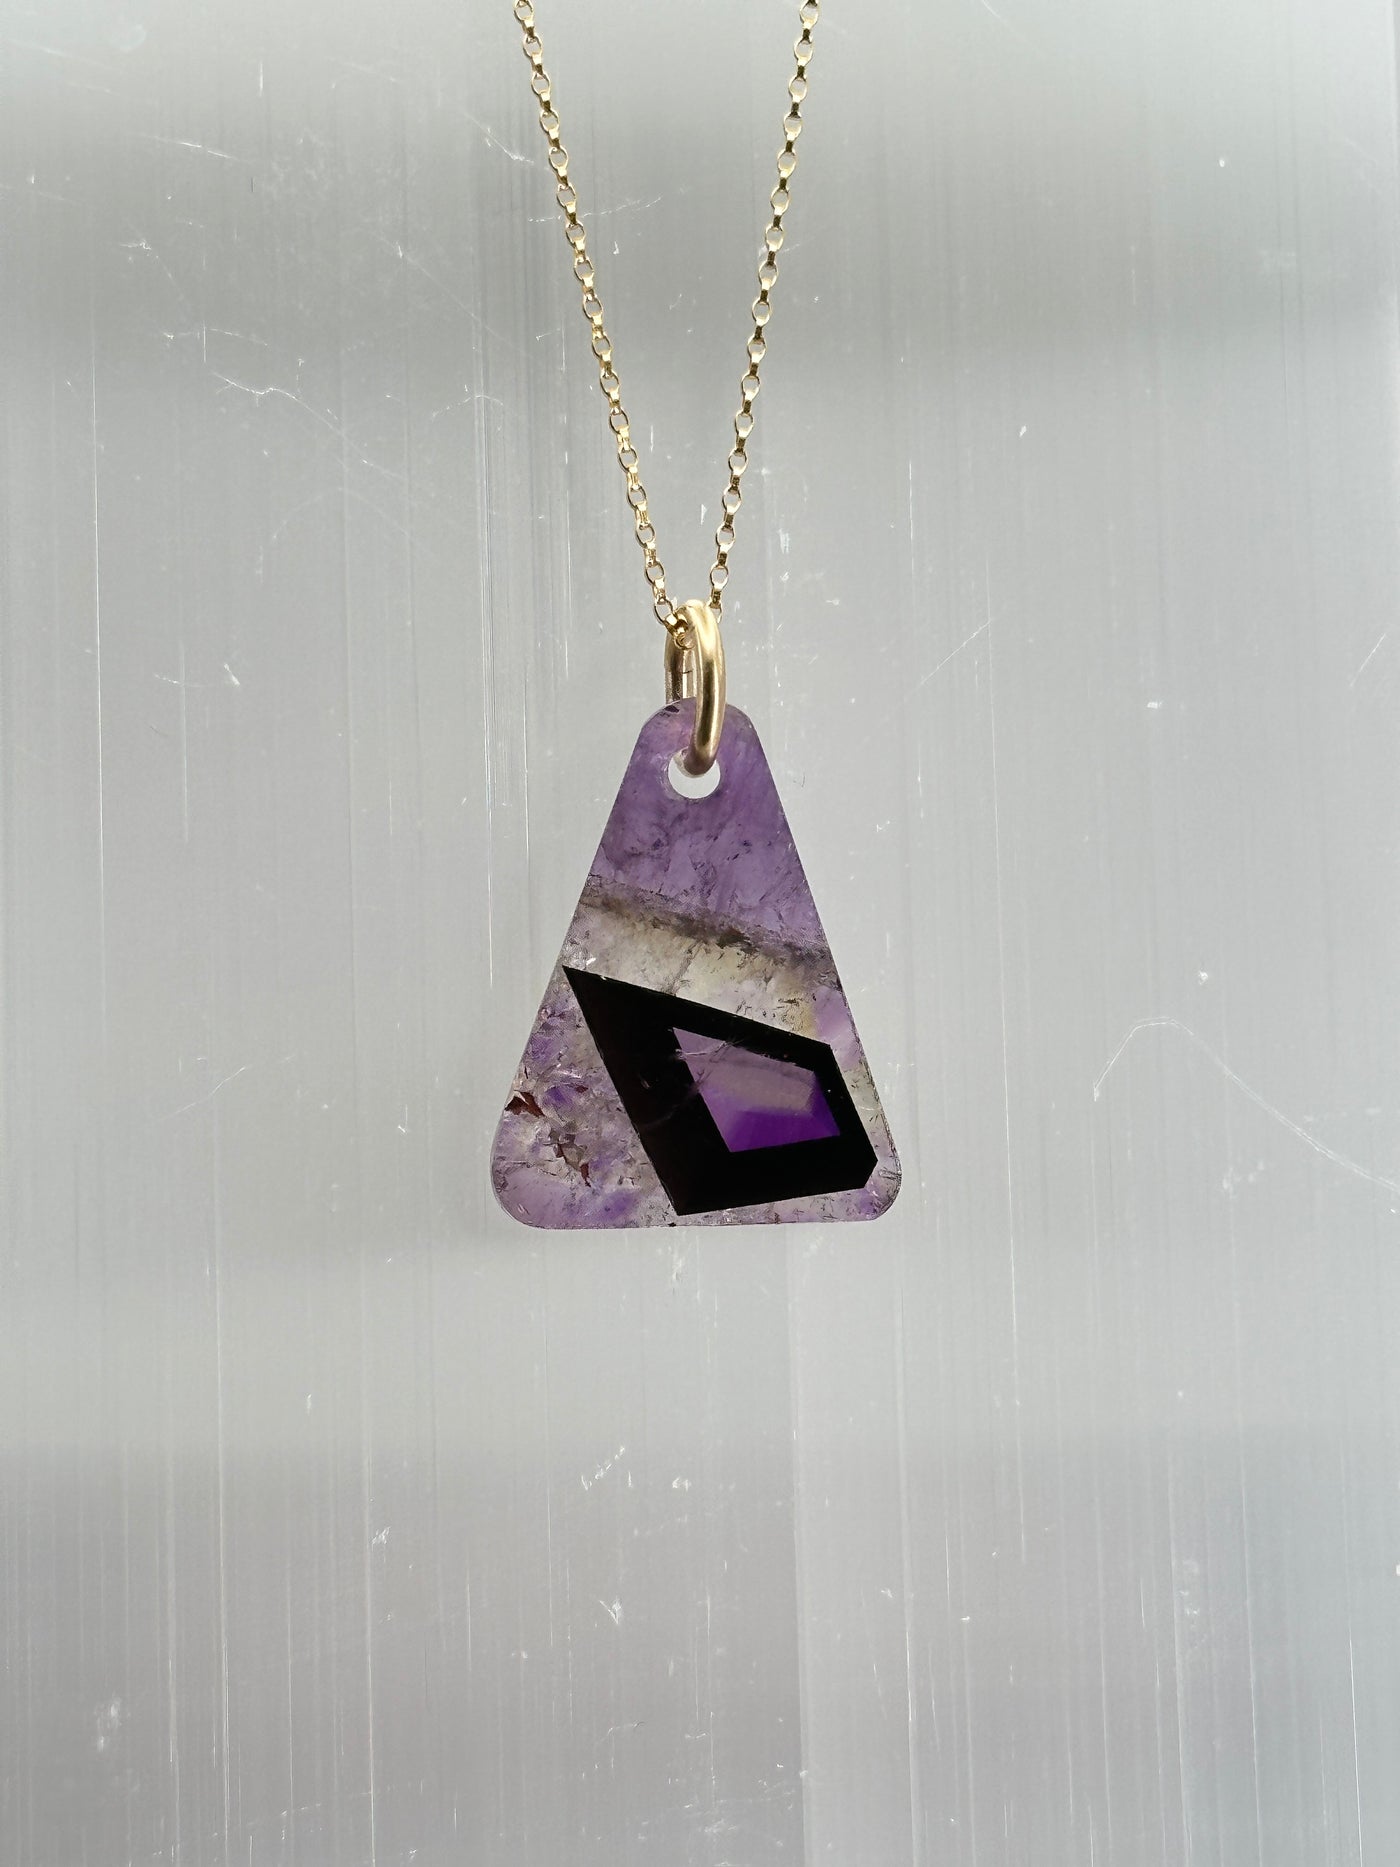 Amethyst (with Rare Crystal Inclusion) Pendant